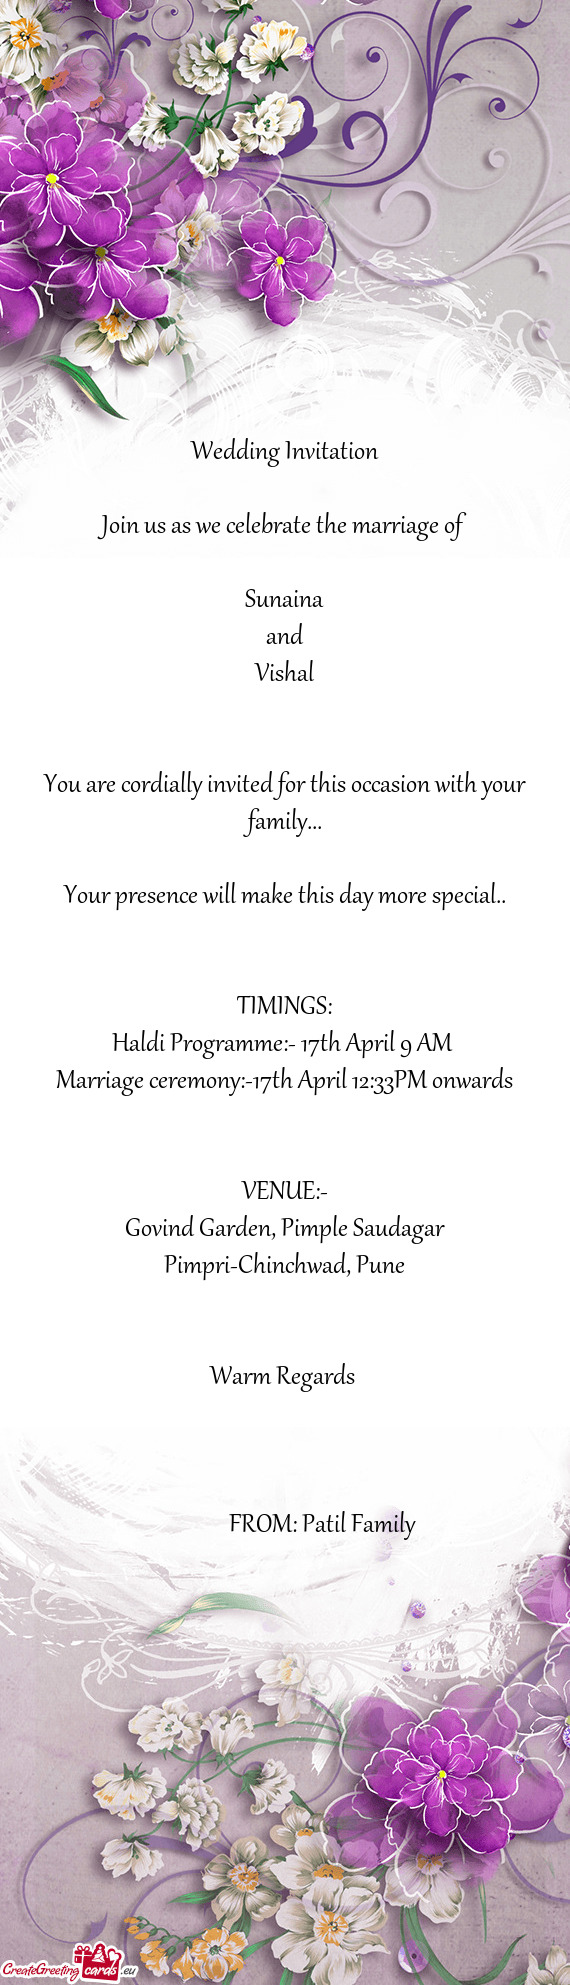 Marriage ceremony:-17th April 12:33PM onwards